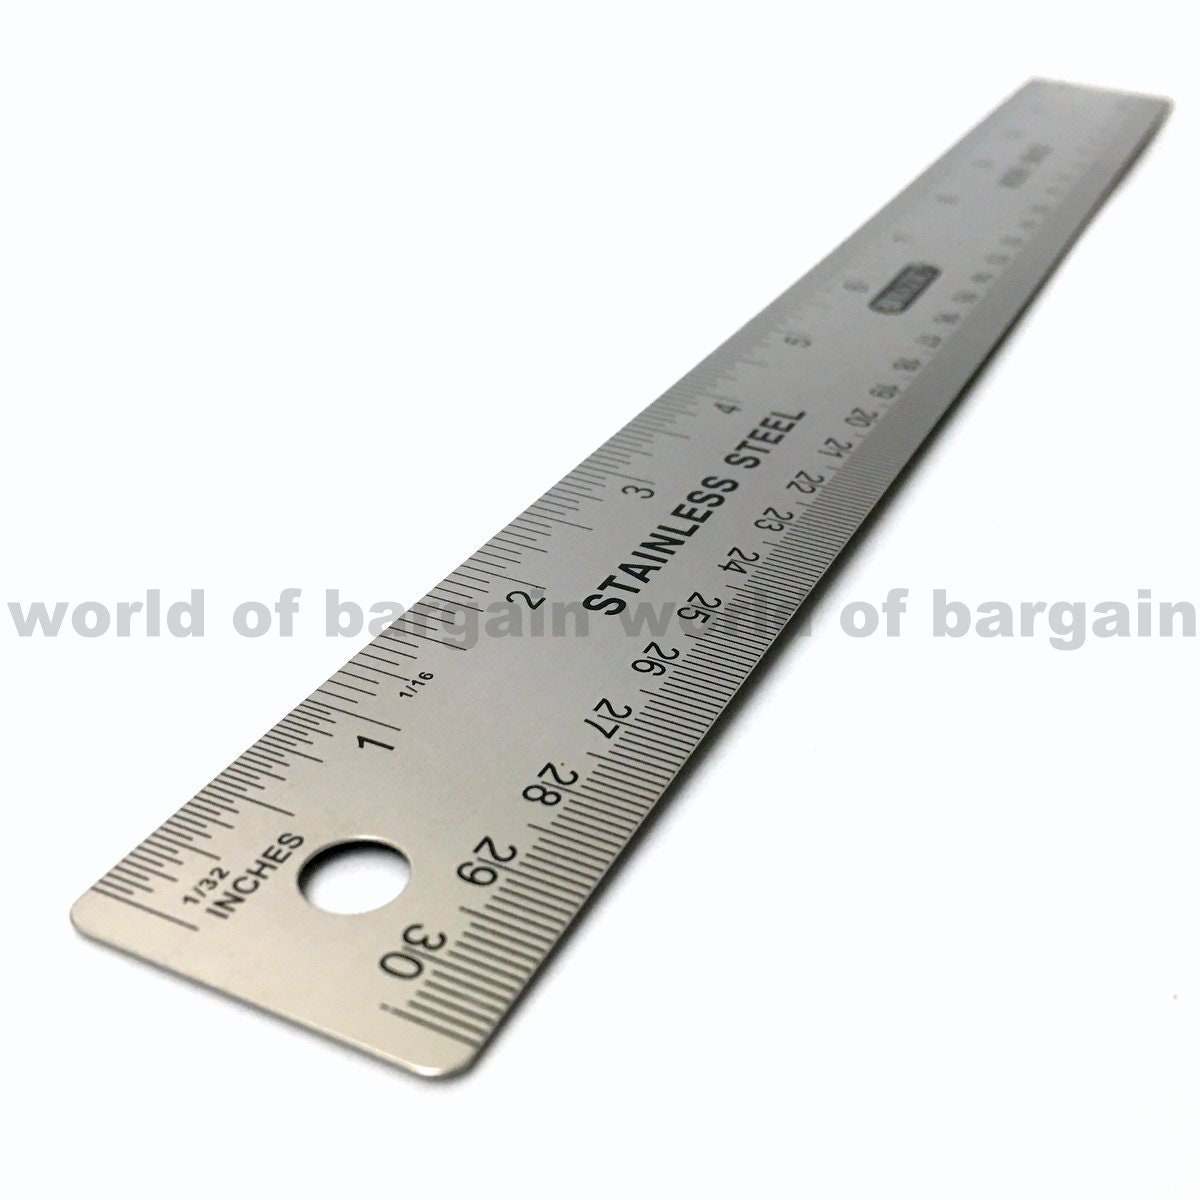 Fairgate 6 Center Finding Ruler, 3/4 Wide, 23-106 Made In USA